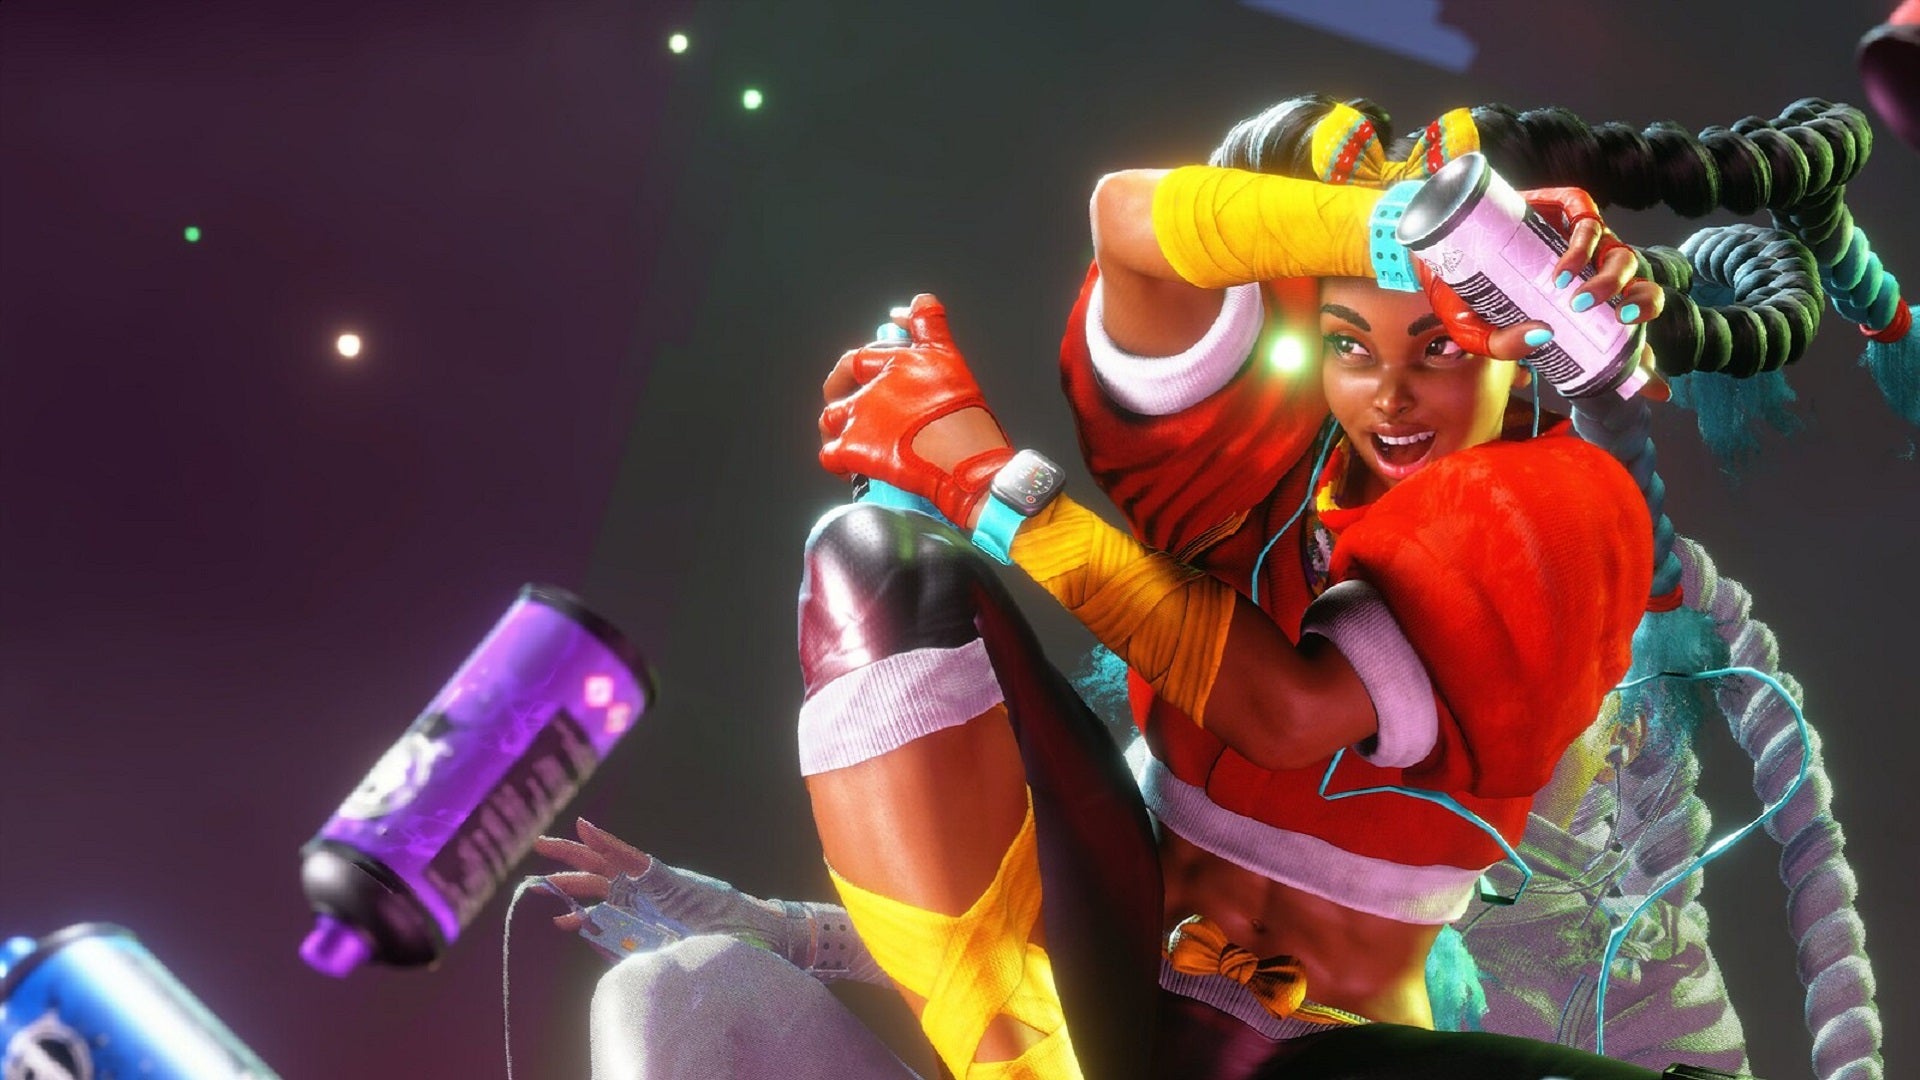 Kimberly from Street Fighter 6, posing with their spray cans (via Evo 2022 reveal trailer).